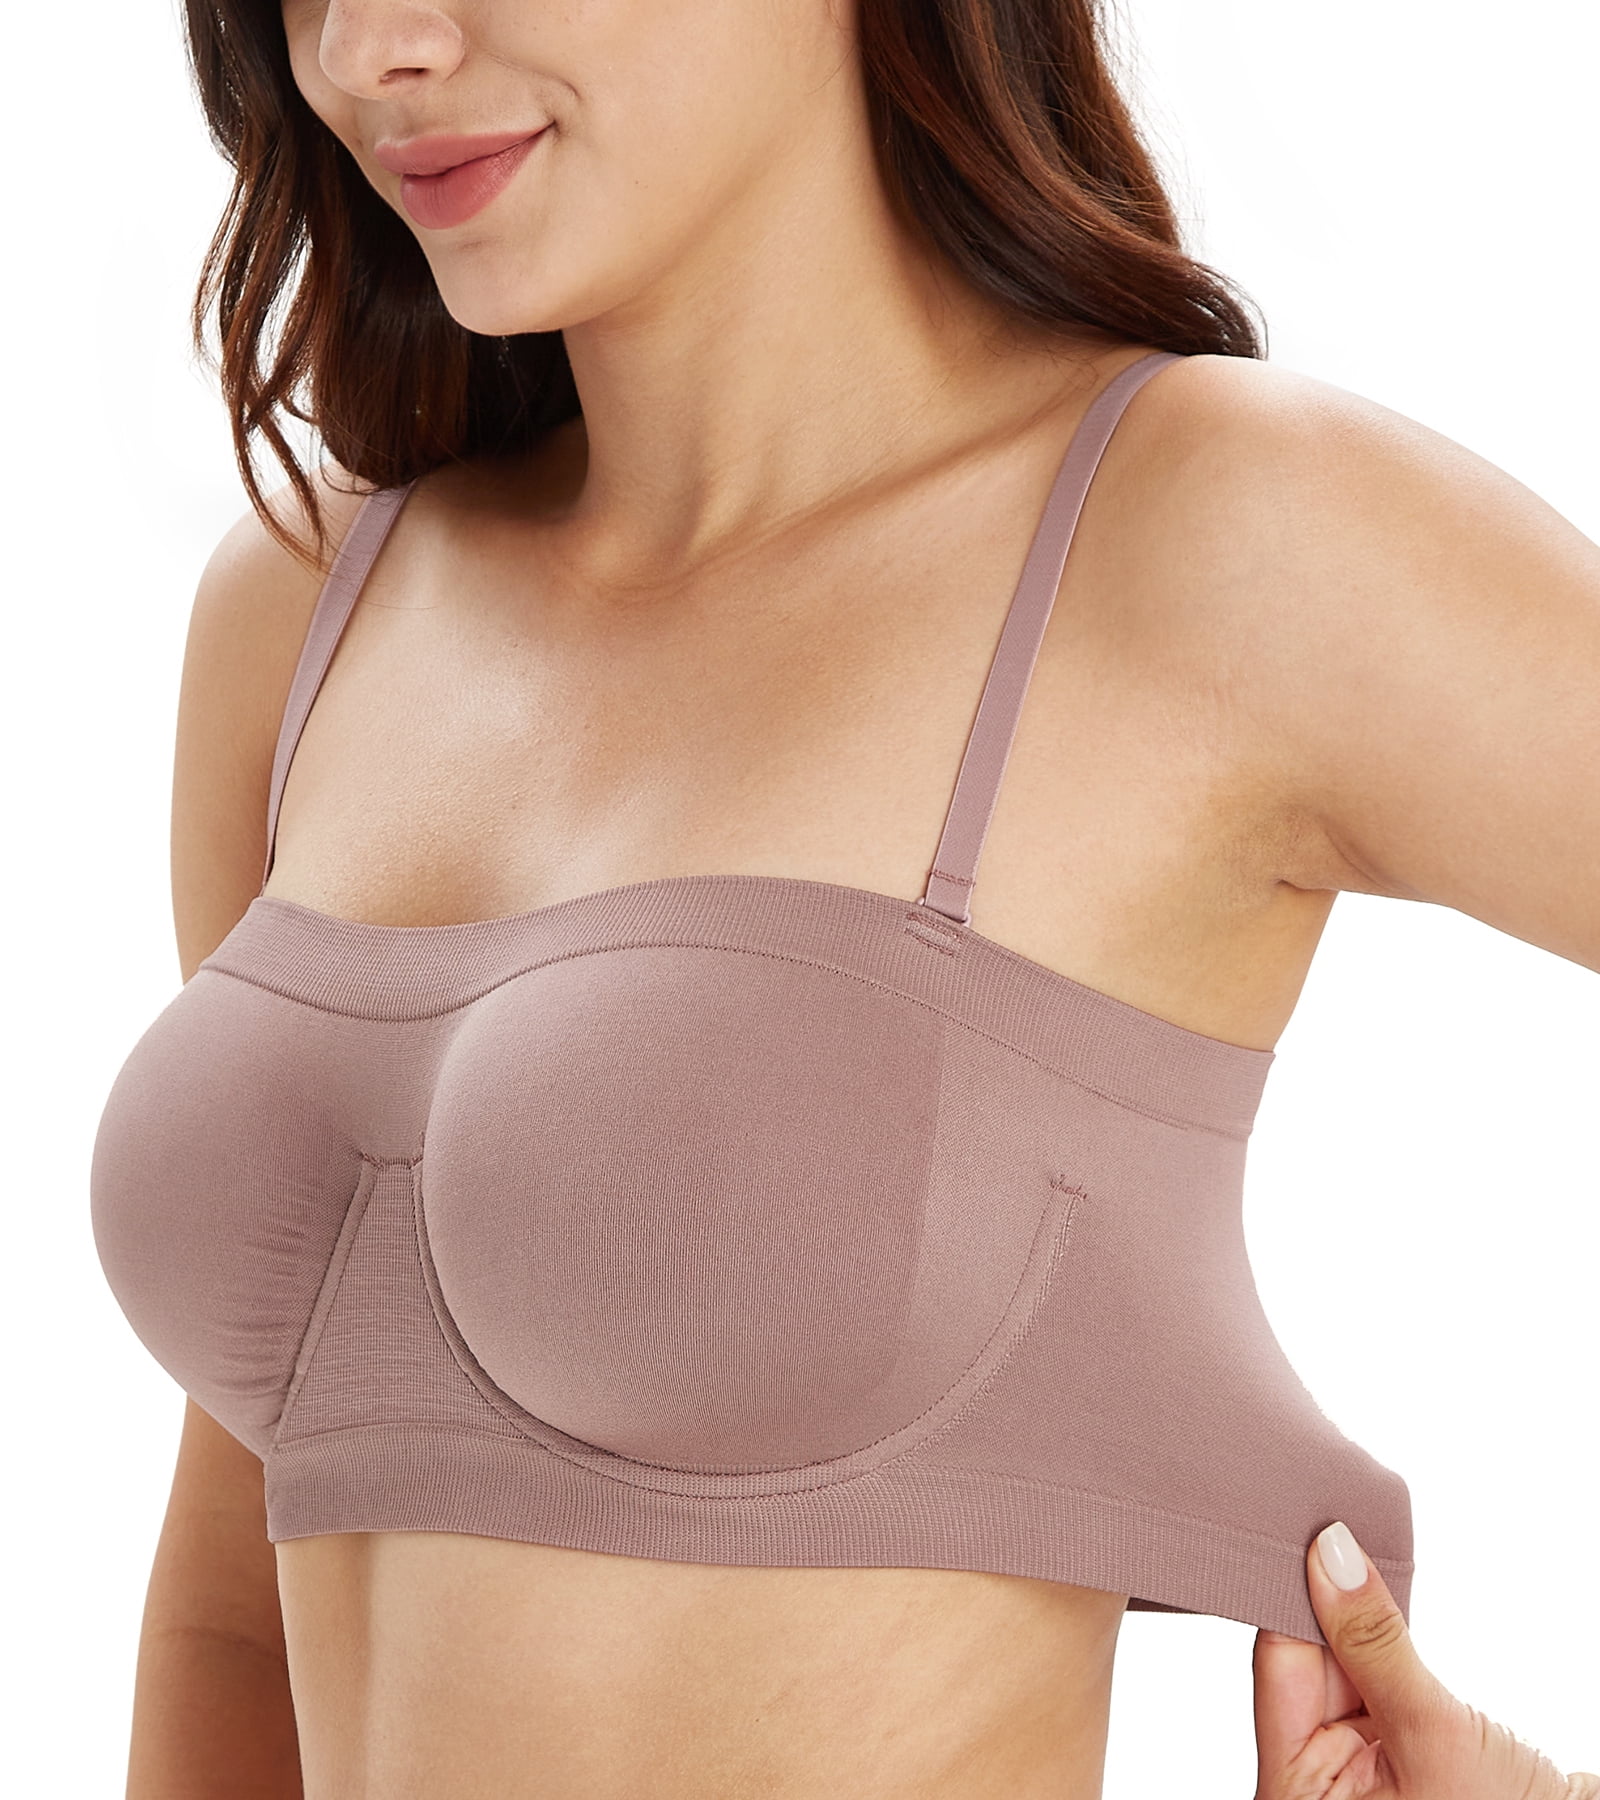 1To Finity Seamless Strapless Tube Bra Combo Pack for Women/Girls (Non  Padded, Non Wired),super stretch fabric provides comfort and flattering fit  and feel,Removable Clear Straps & Pads. Seamless Wirefree Strapless Bras.